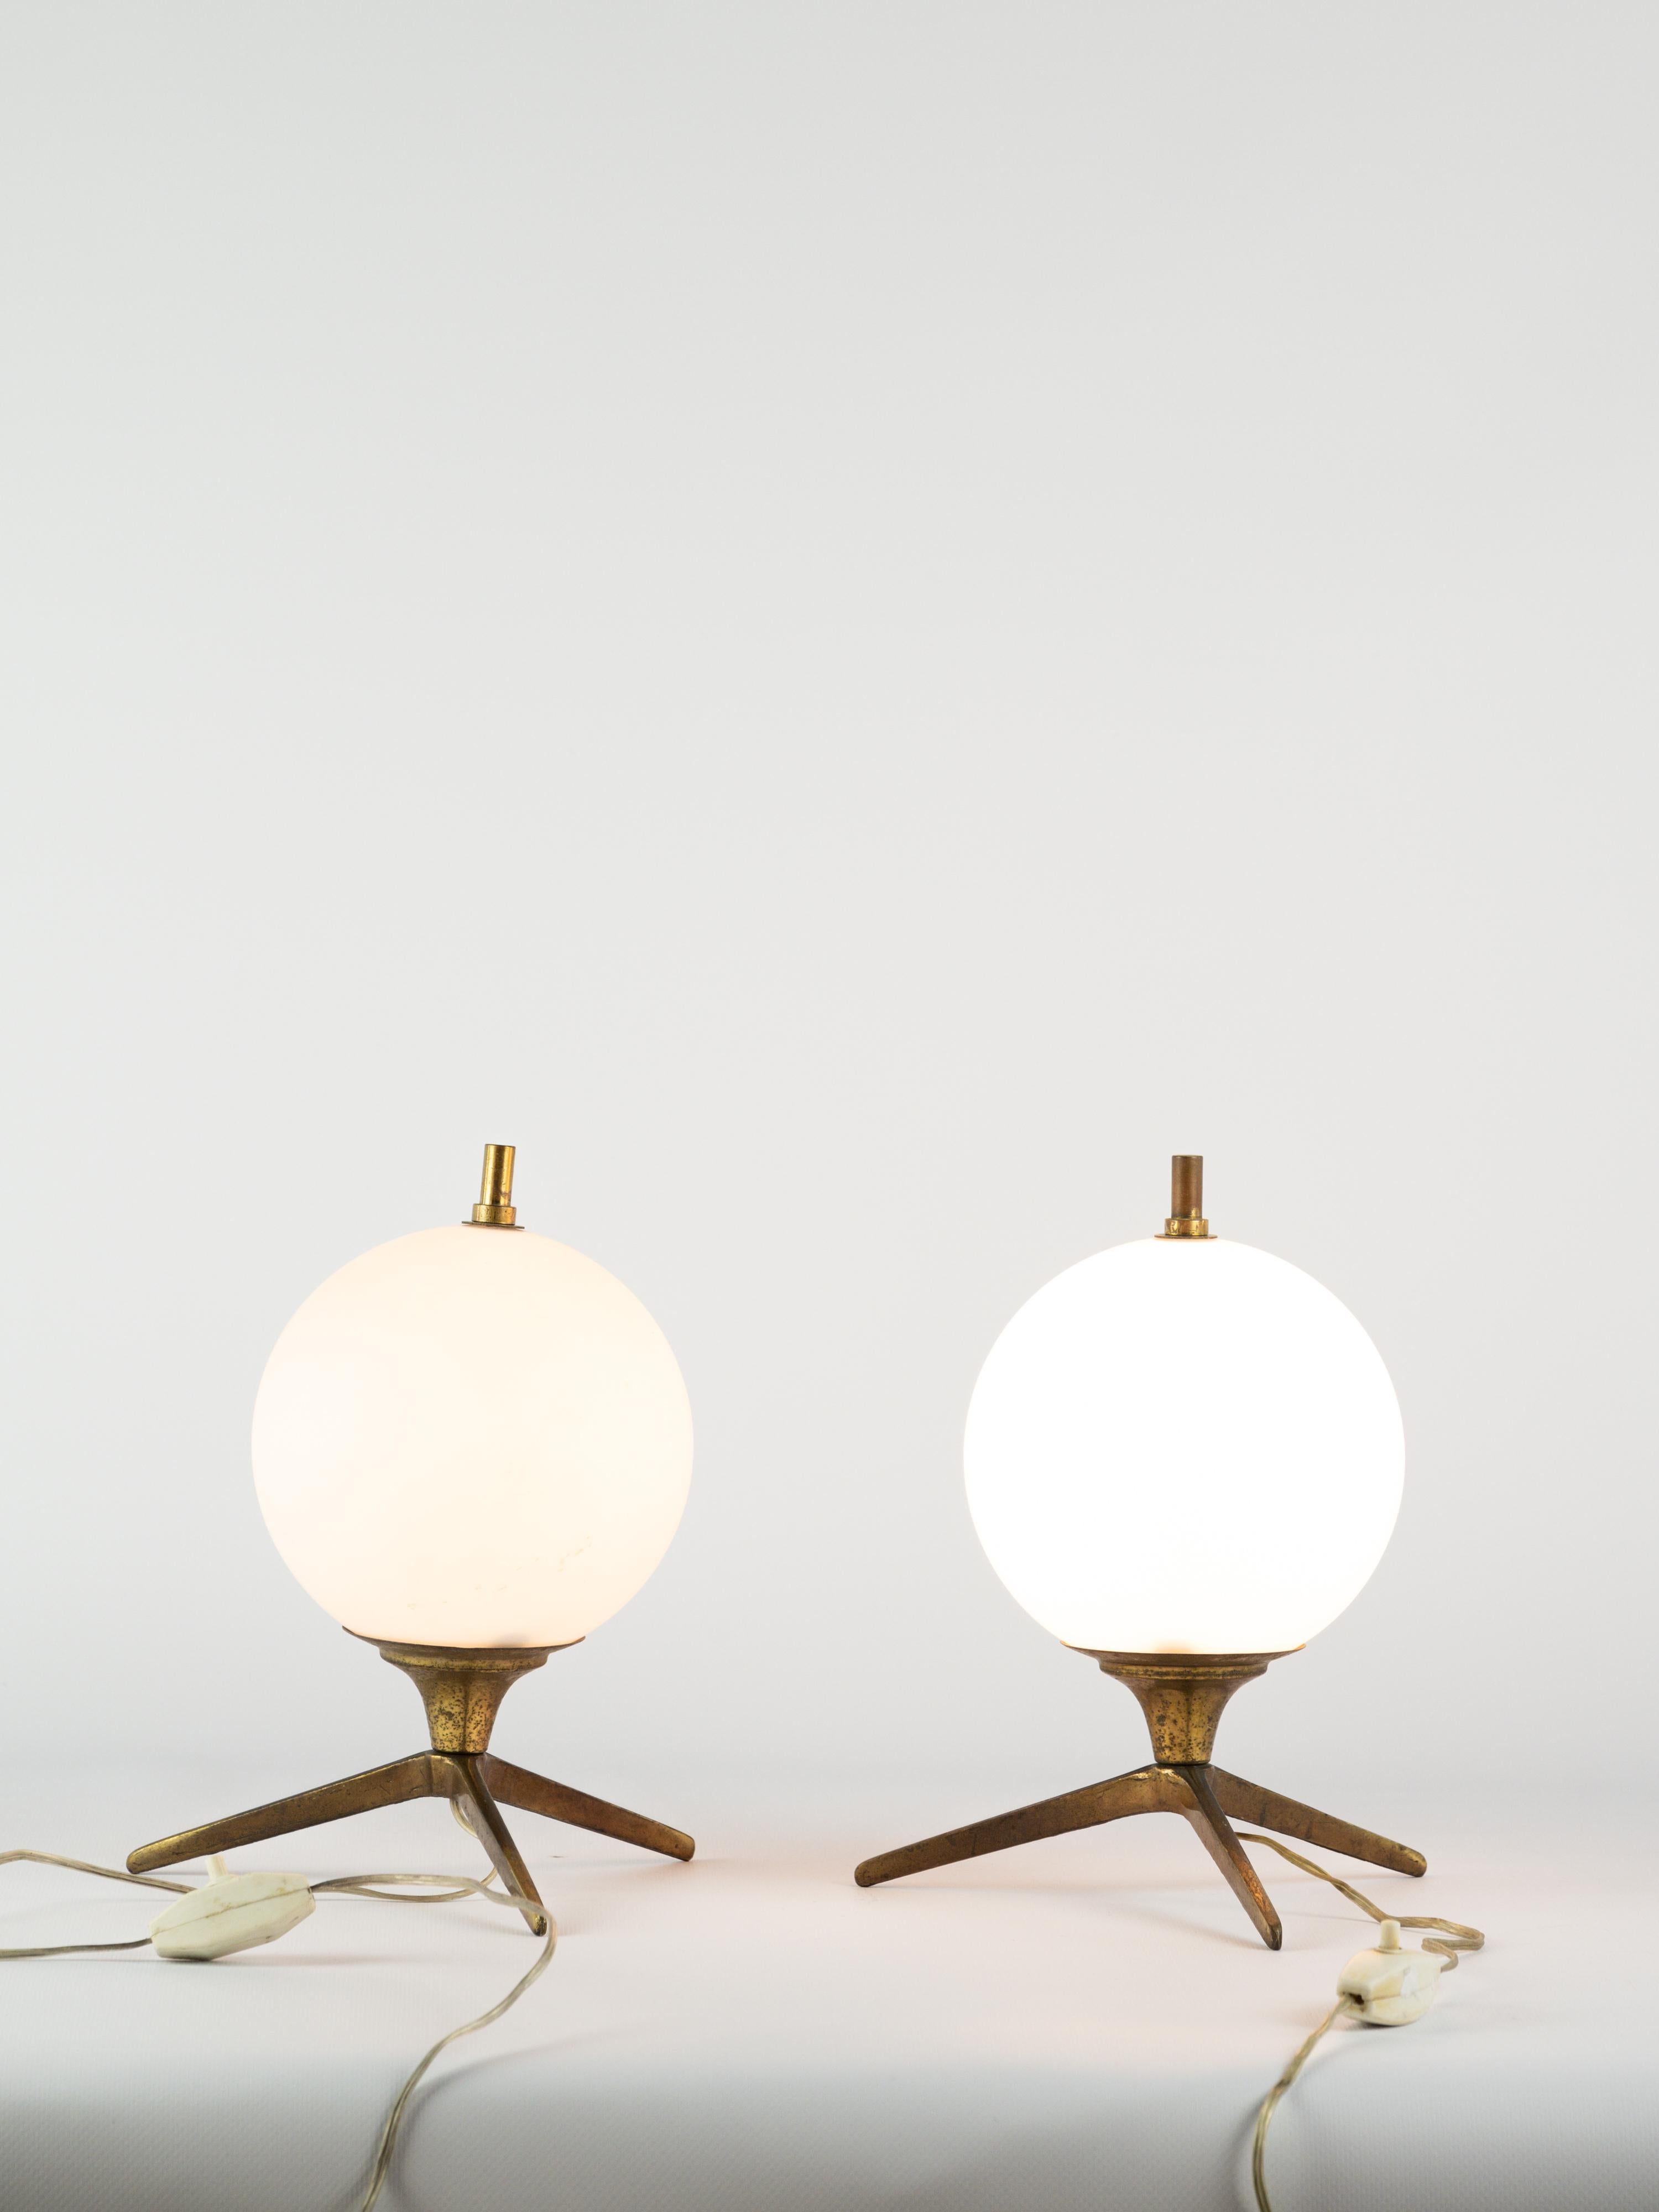 Stunning pair of table lamps in brass and opaline. 

3 feet structure. 

Italian work circa 1950

Italian plug

More information upon request 